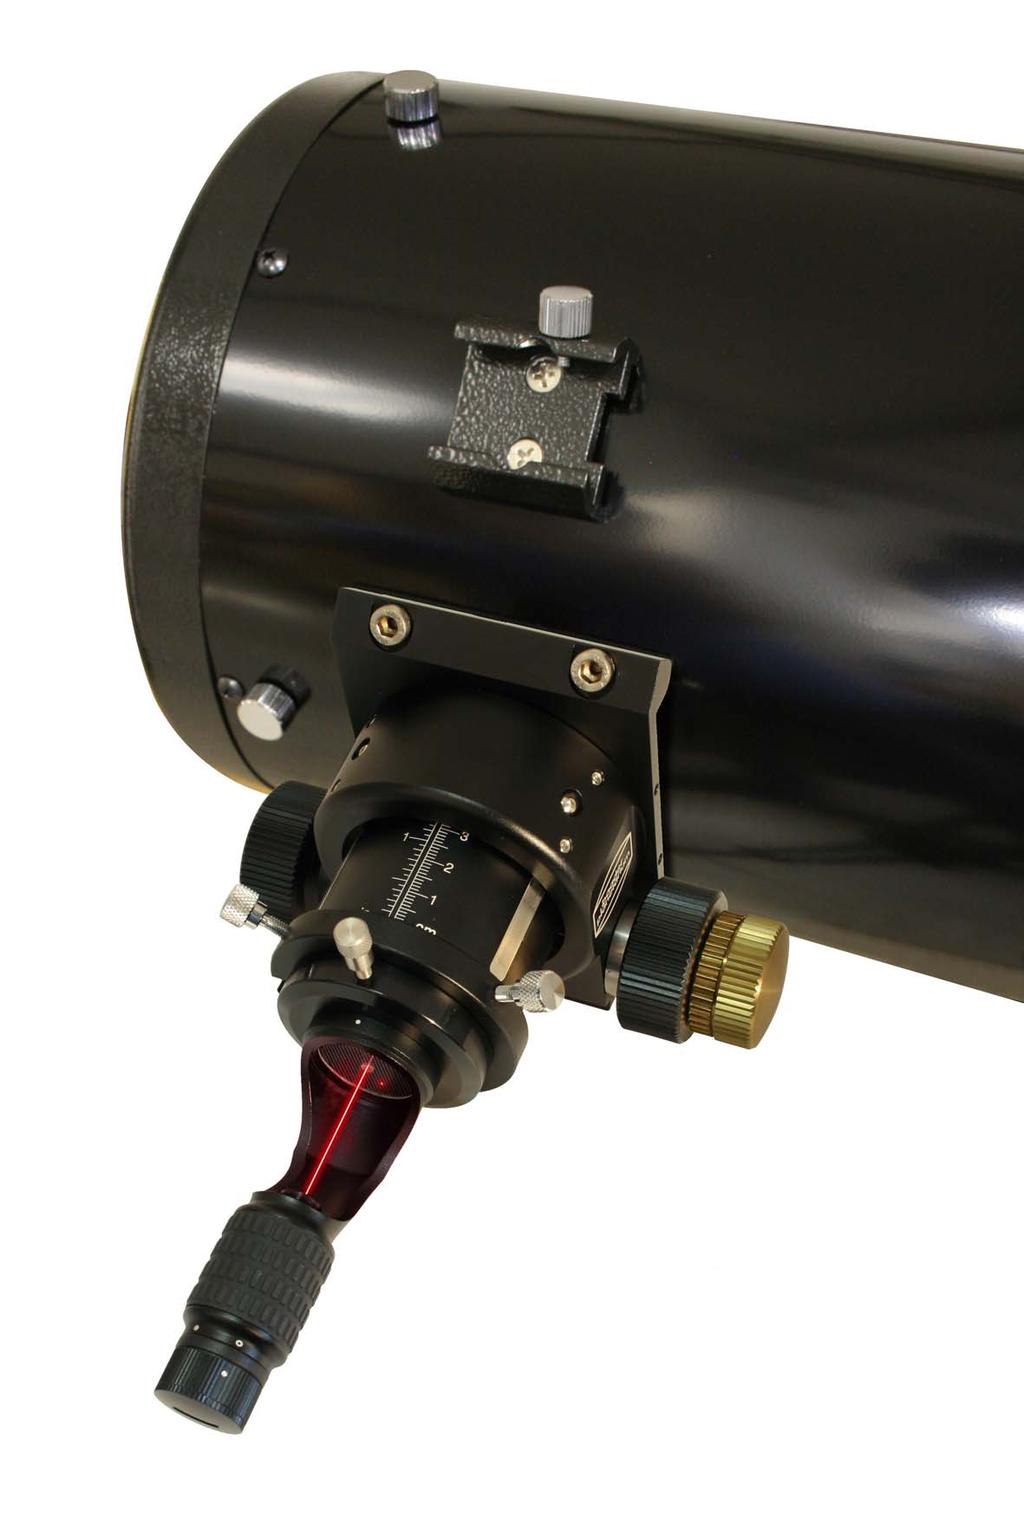 Adjustment (Collimation) of Newtonian Telescopes with the help of the LASER-COLLI TM MARK III